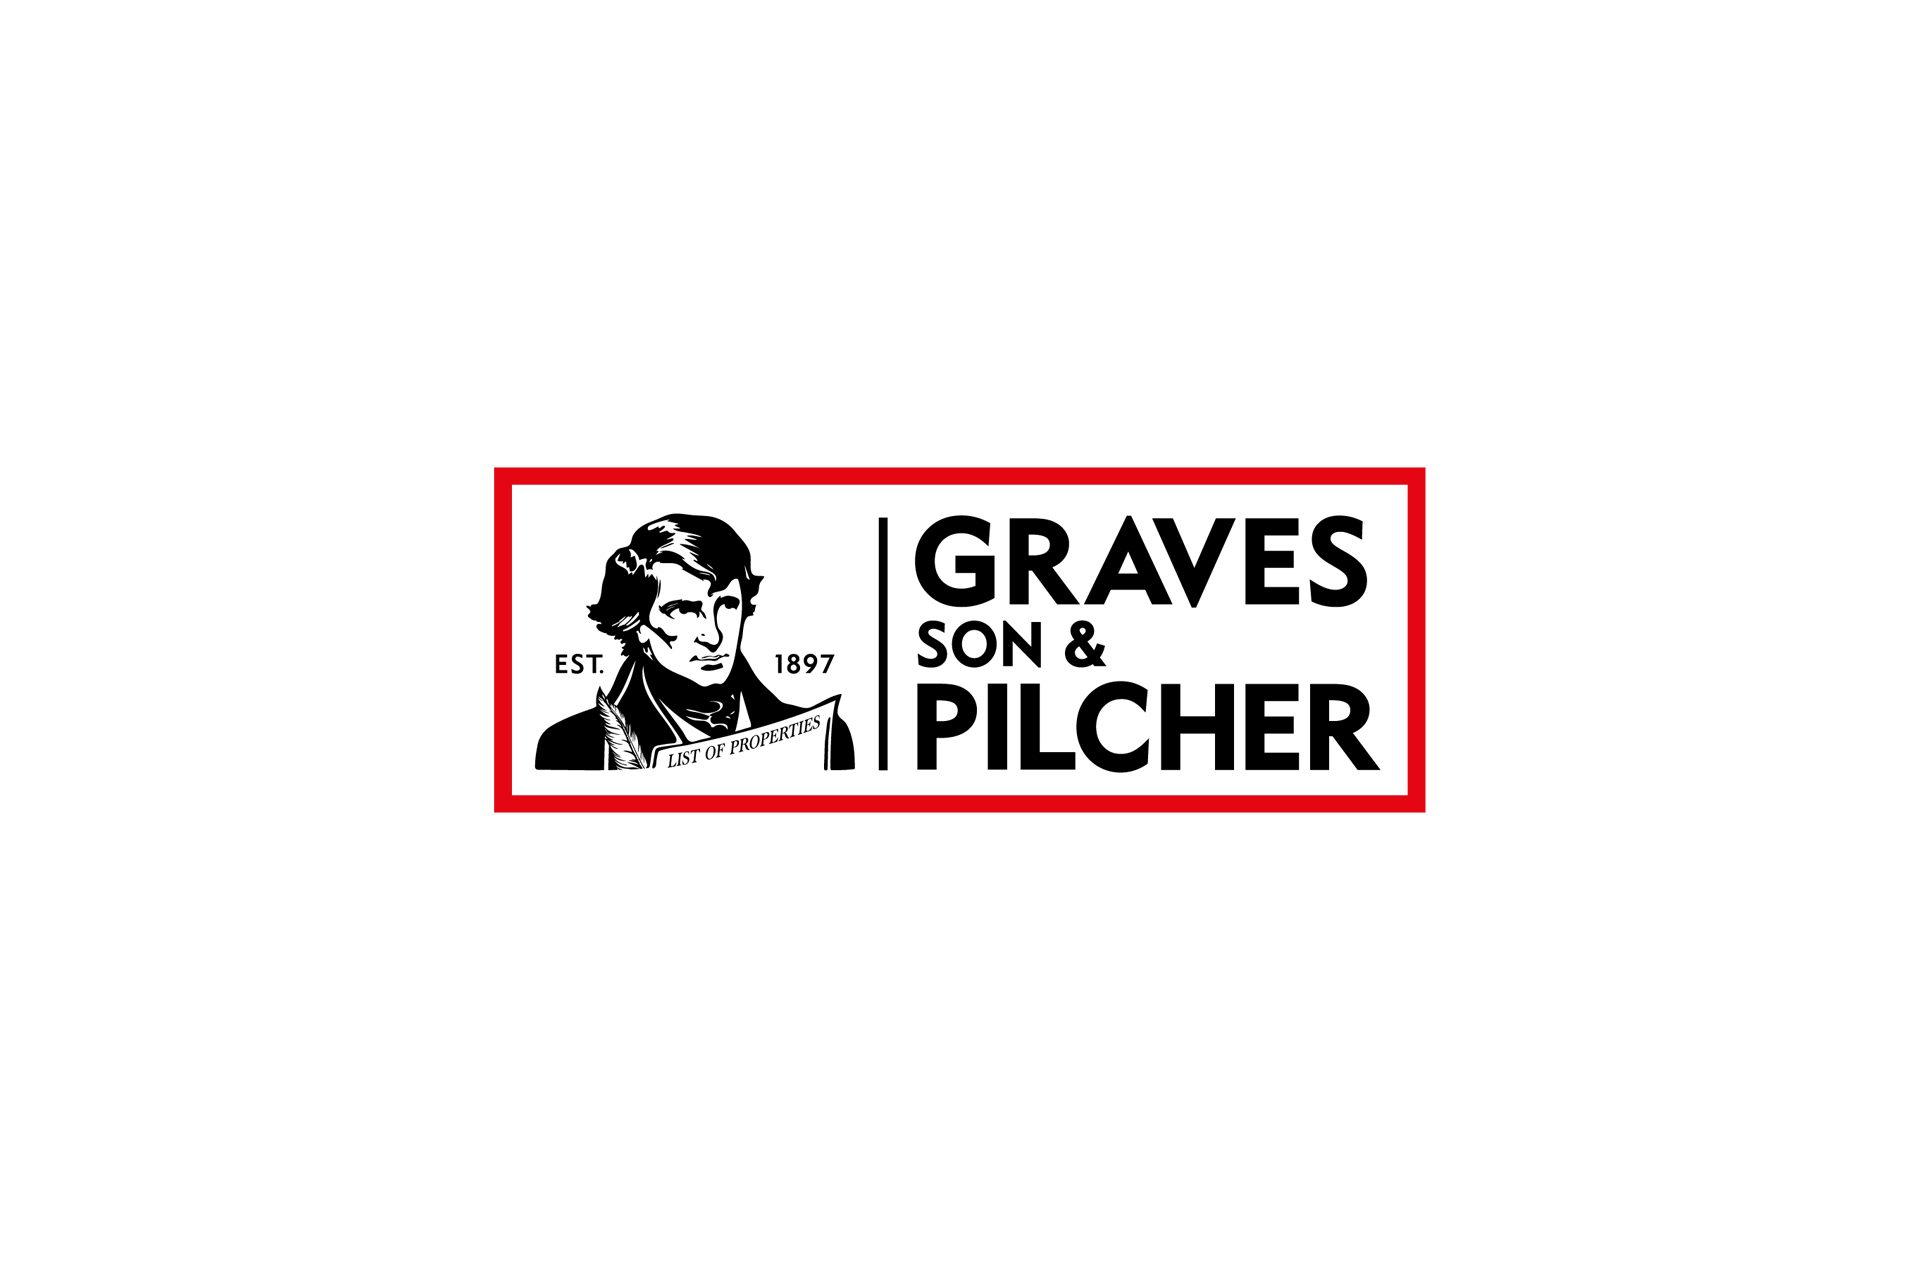 Graves son and pilcher